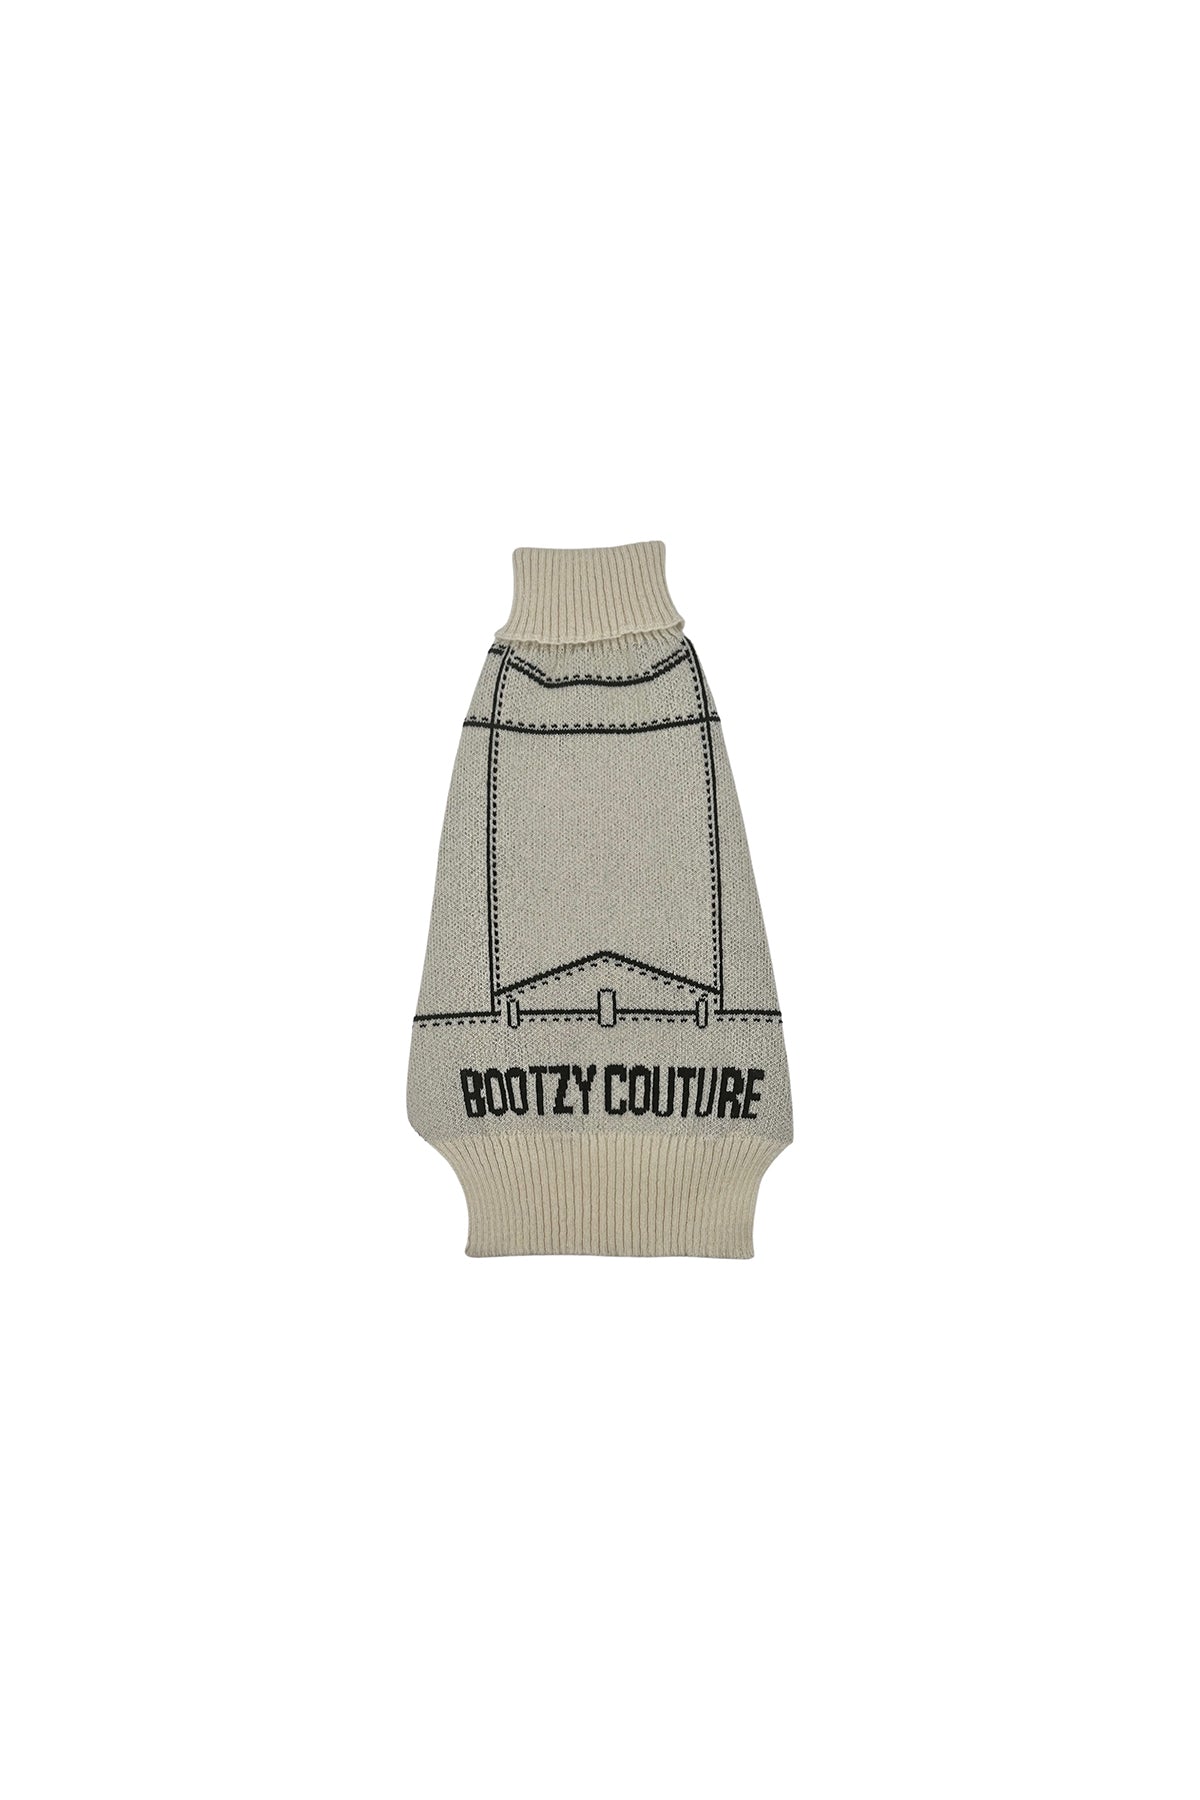 BOOTZY COUTURE | REBEL RIDER SWEATER